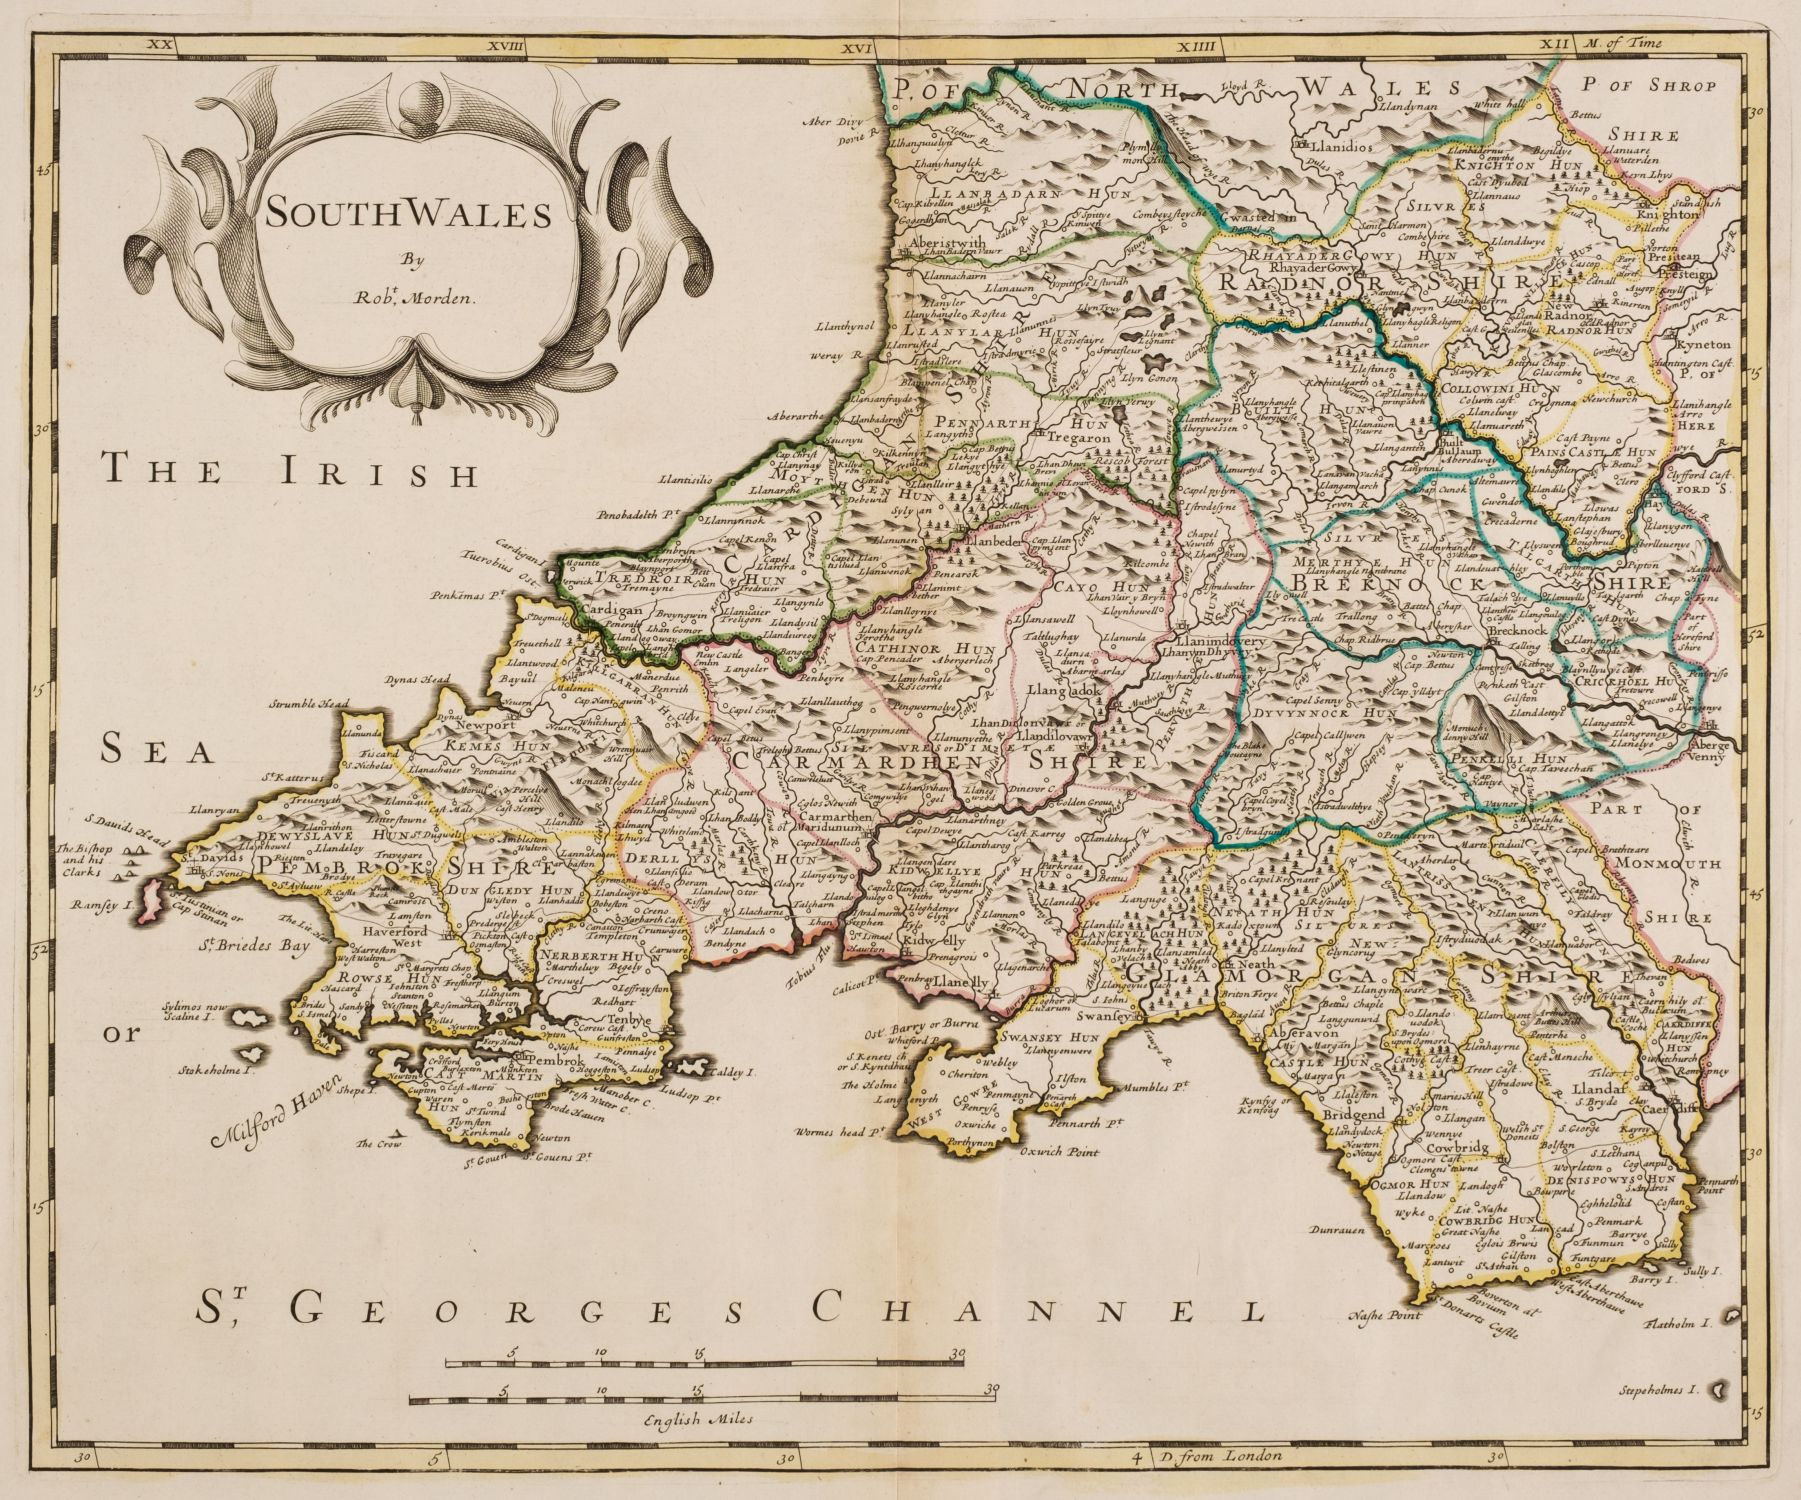 Morden (Robert). A collection of 18 maps, 1695 or later